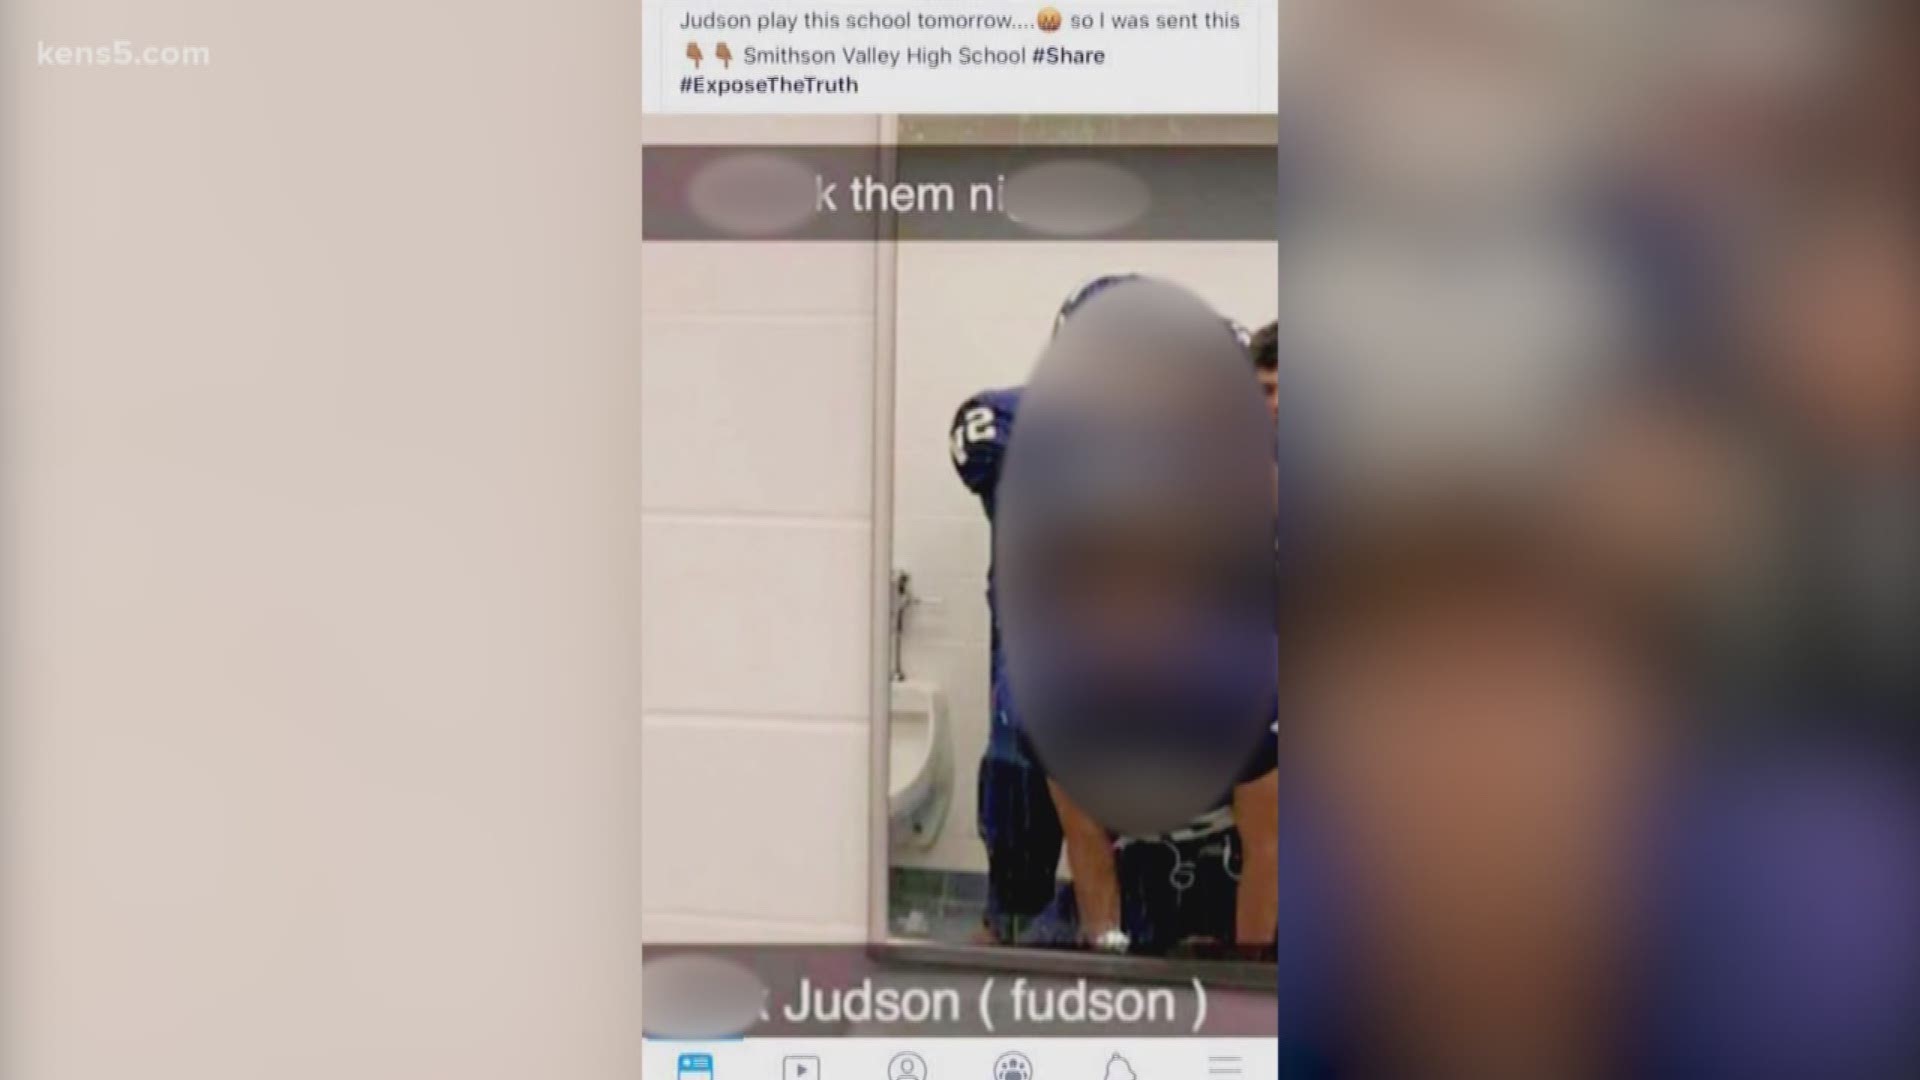 Judson Independent School District is taking extra security precautions following a selfie with a racial slur and profanity.